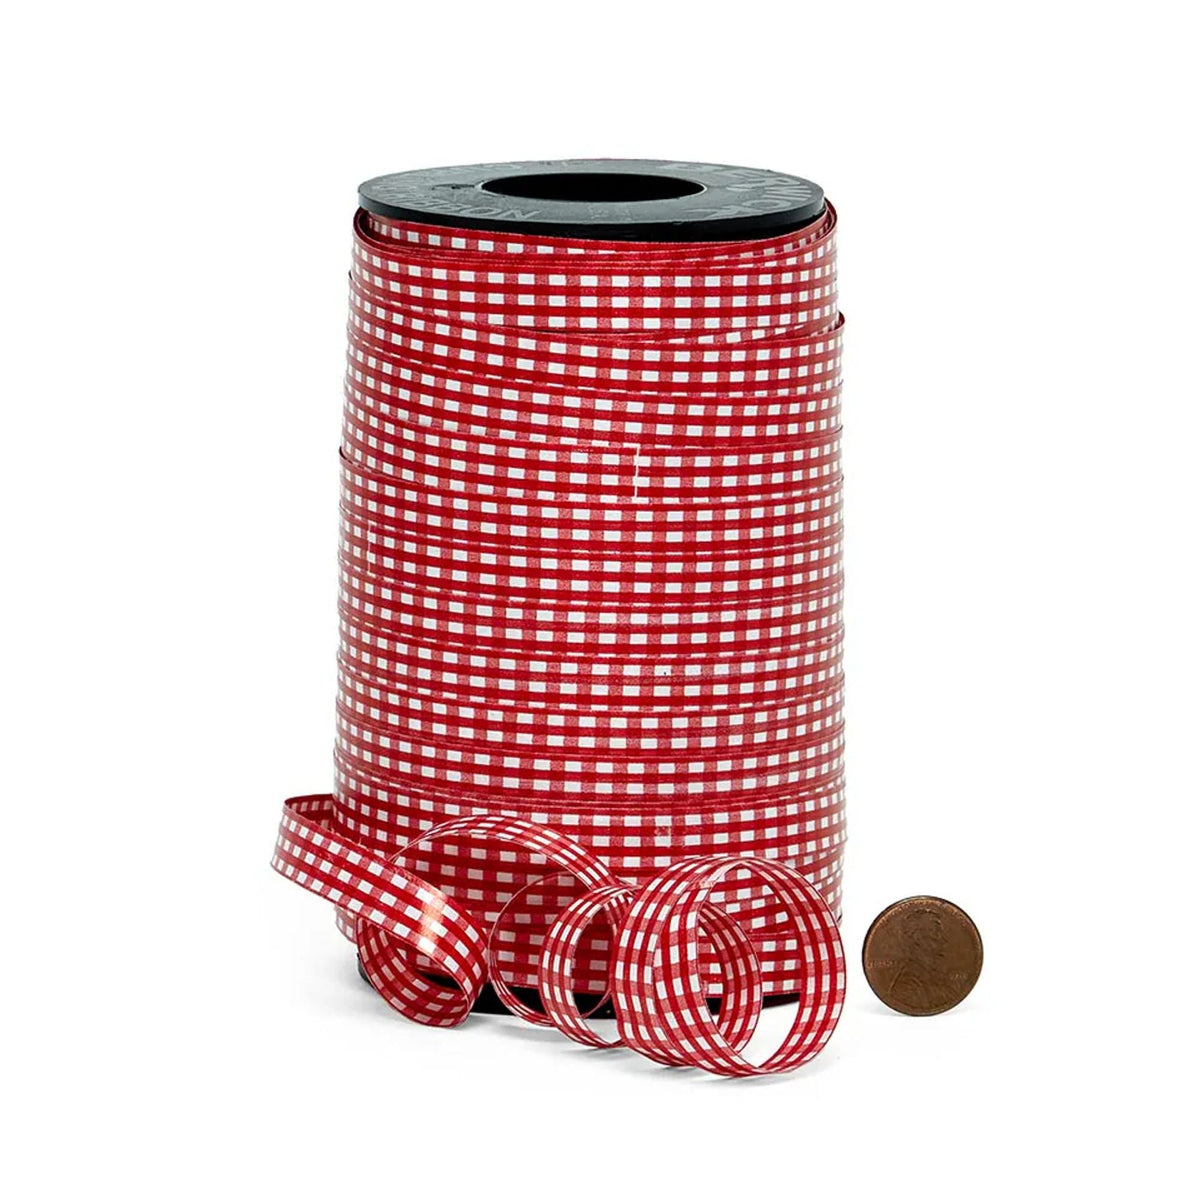 Red/white Check Ribbon 3/8 Wide by the Yard, Gingham Ribbon 